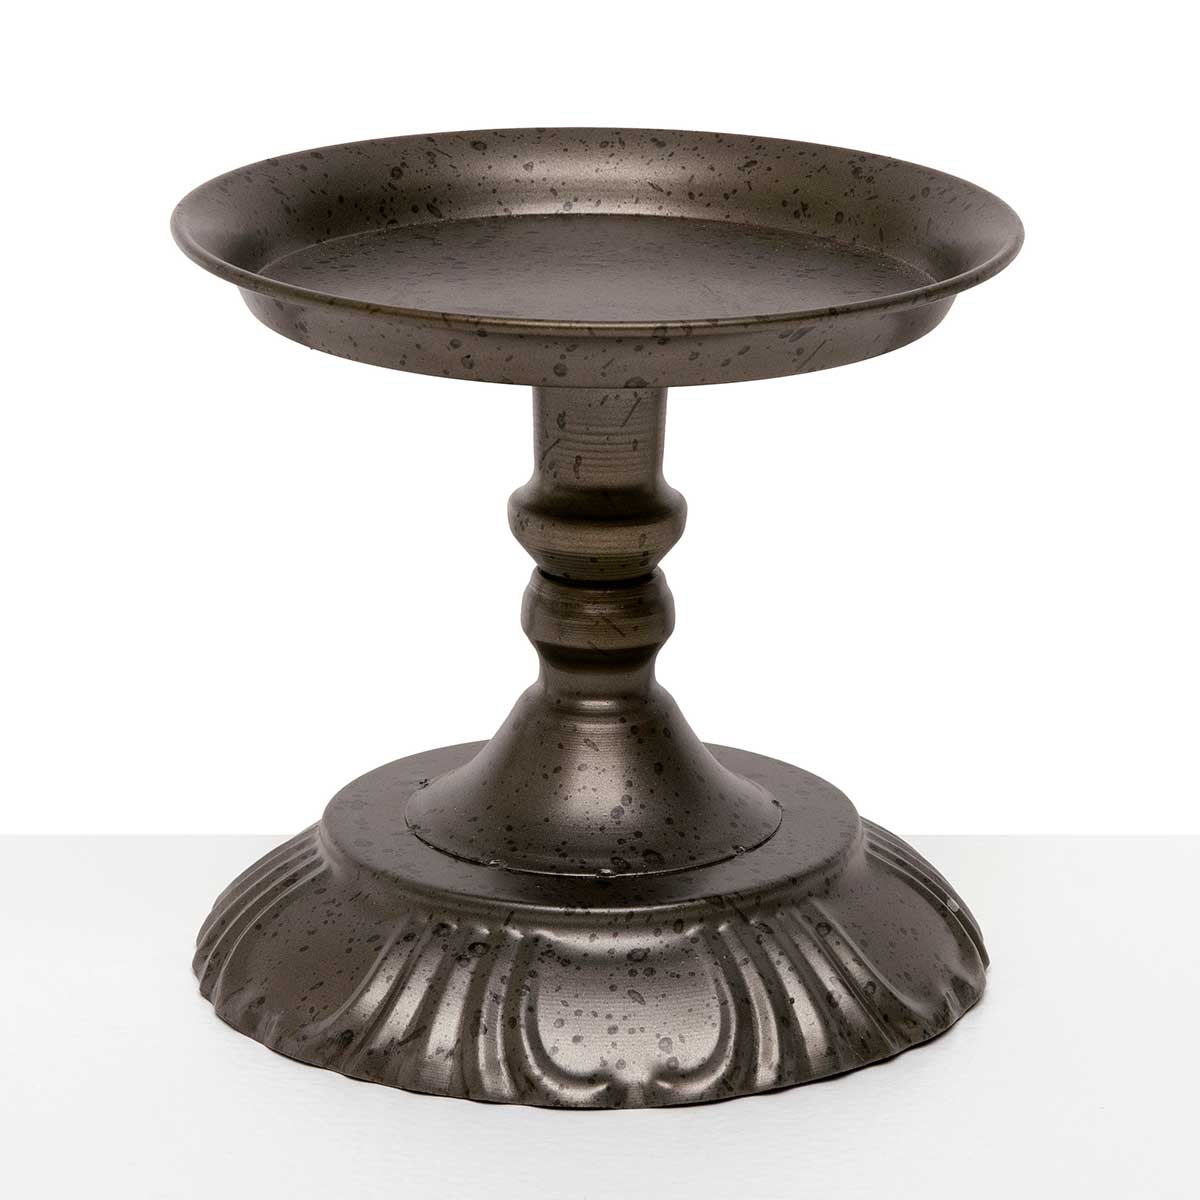 DISPLAY TRAY/CANDLEHOLDER 6.25IN X 6IN PEWTER METAL